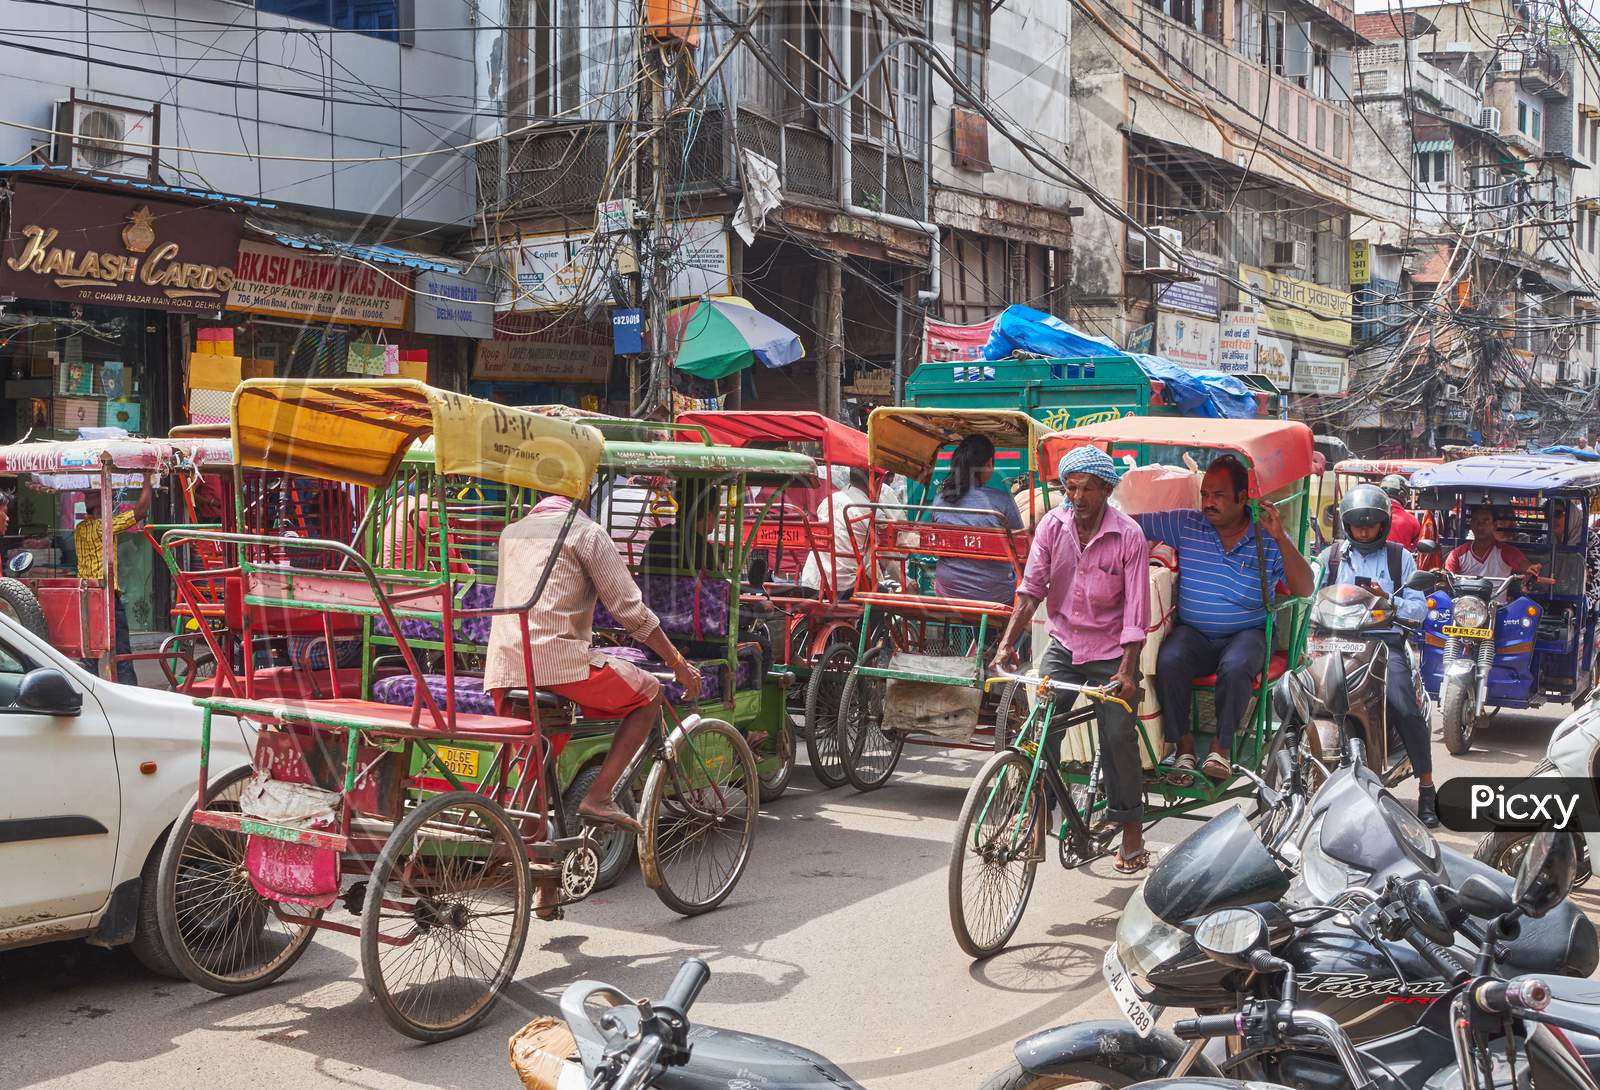 Traffic Congestion In Chandni Chowk, A Busy Shopping Area In Old Delhi With Bazaars And Colorful Narrow Streets